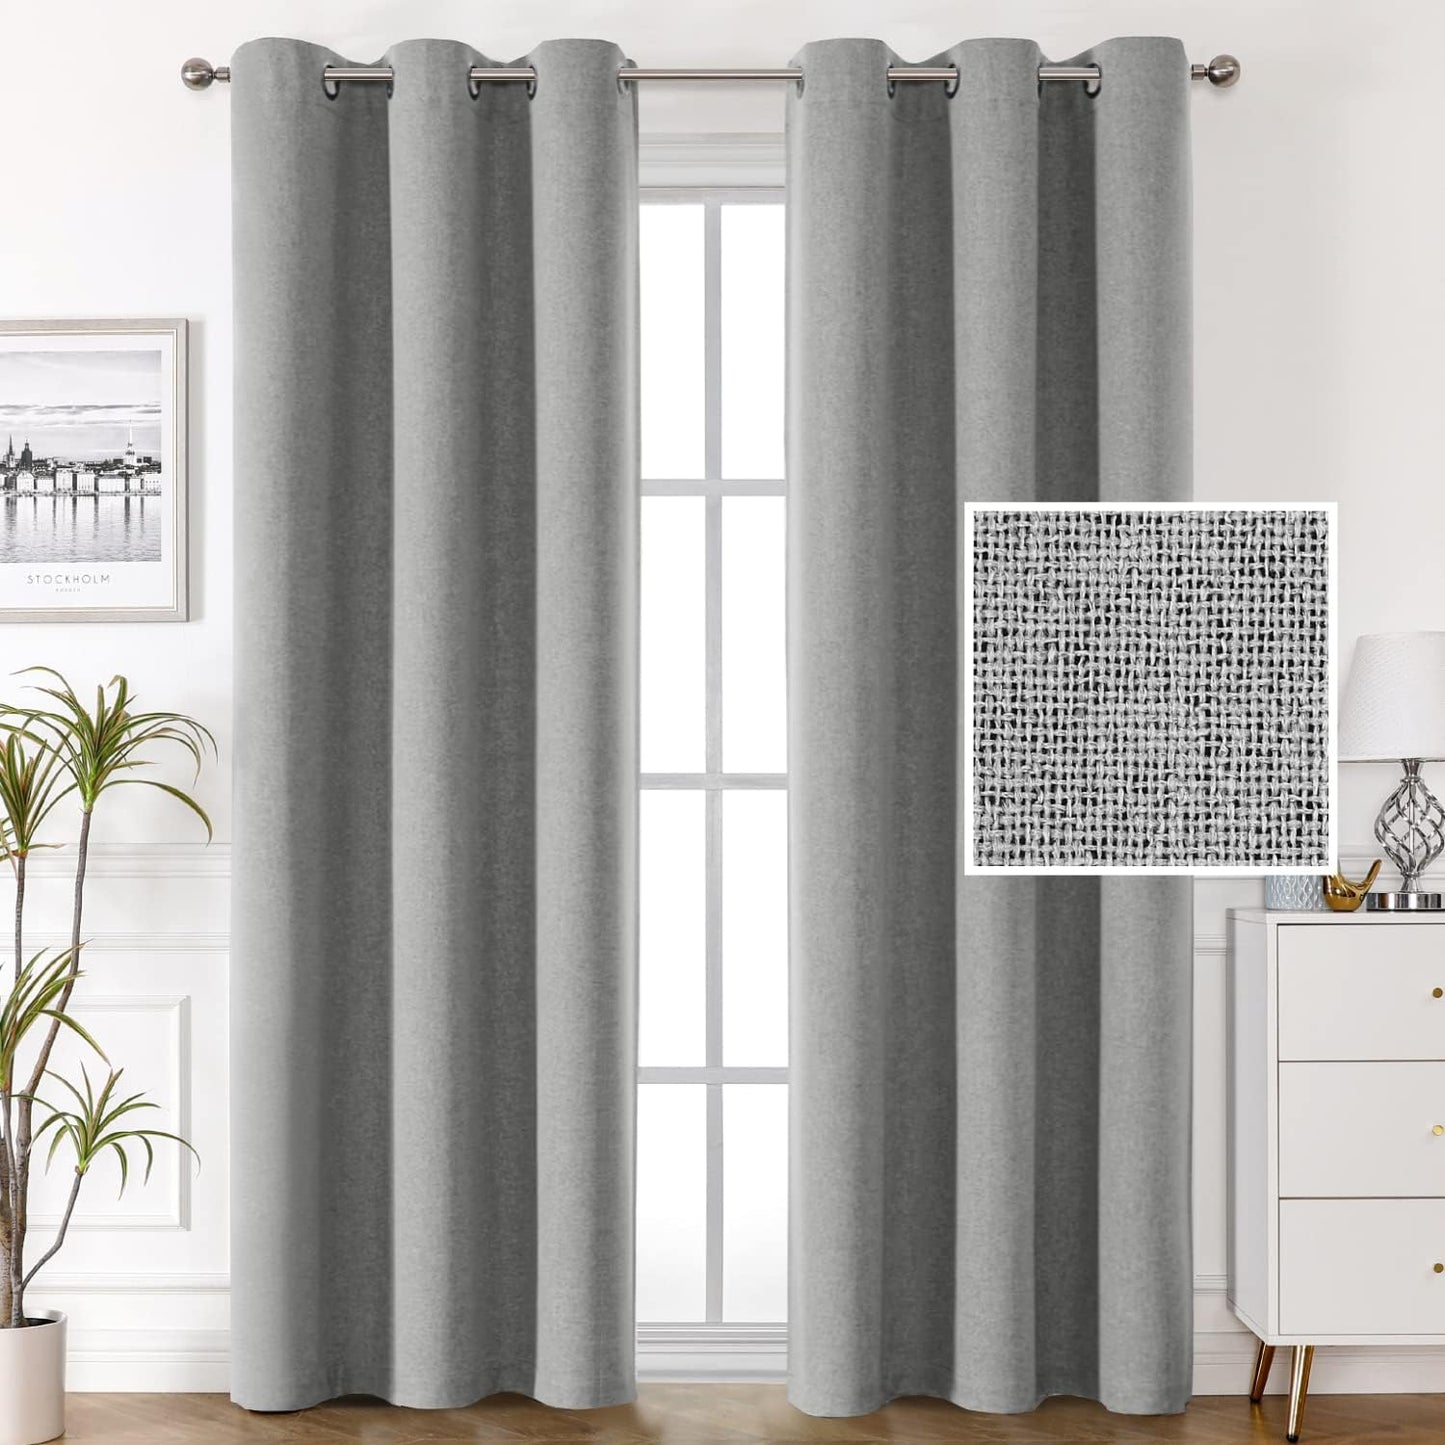 H.VERSAILTEX 100% Blackout Linen Look Curtains Thermal Insulated Curtains for Living Room Textured Burlap Drapes for Bedroom Grommet Linen Noise Blocking Curtains 42 X 84 Inch, 2 Panels - Off-White  H.VERSAILTEX Grey 42"W X 84"L 